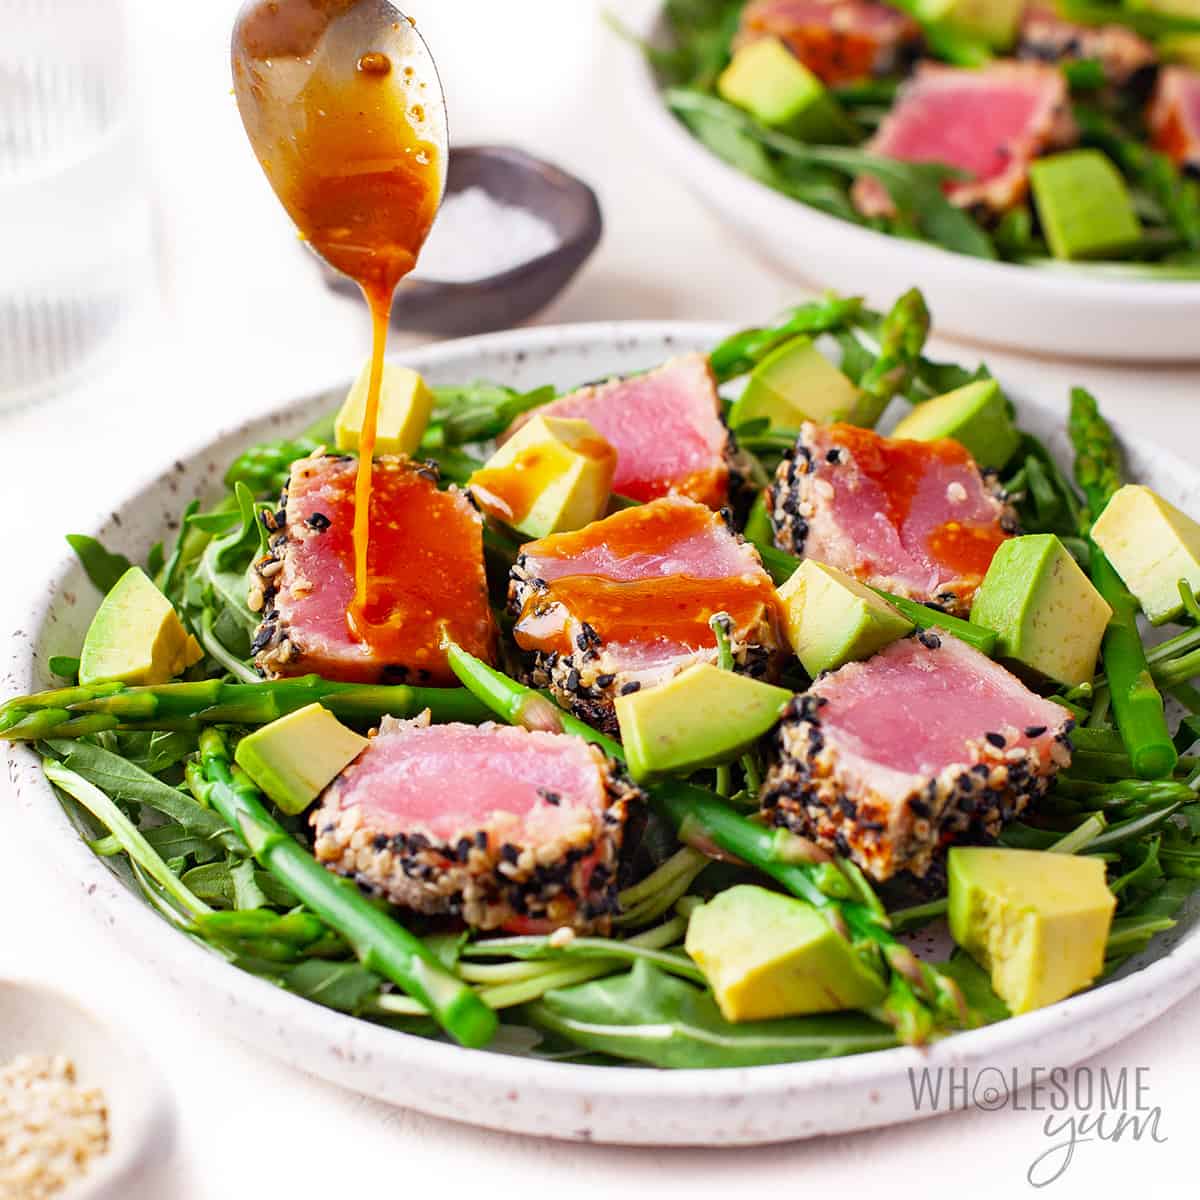 Ahi tuna salad recipe with dressing being drizzled.